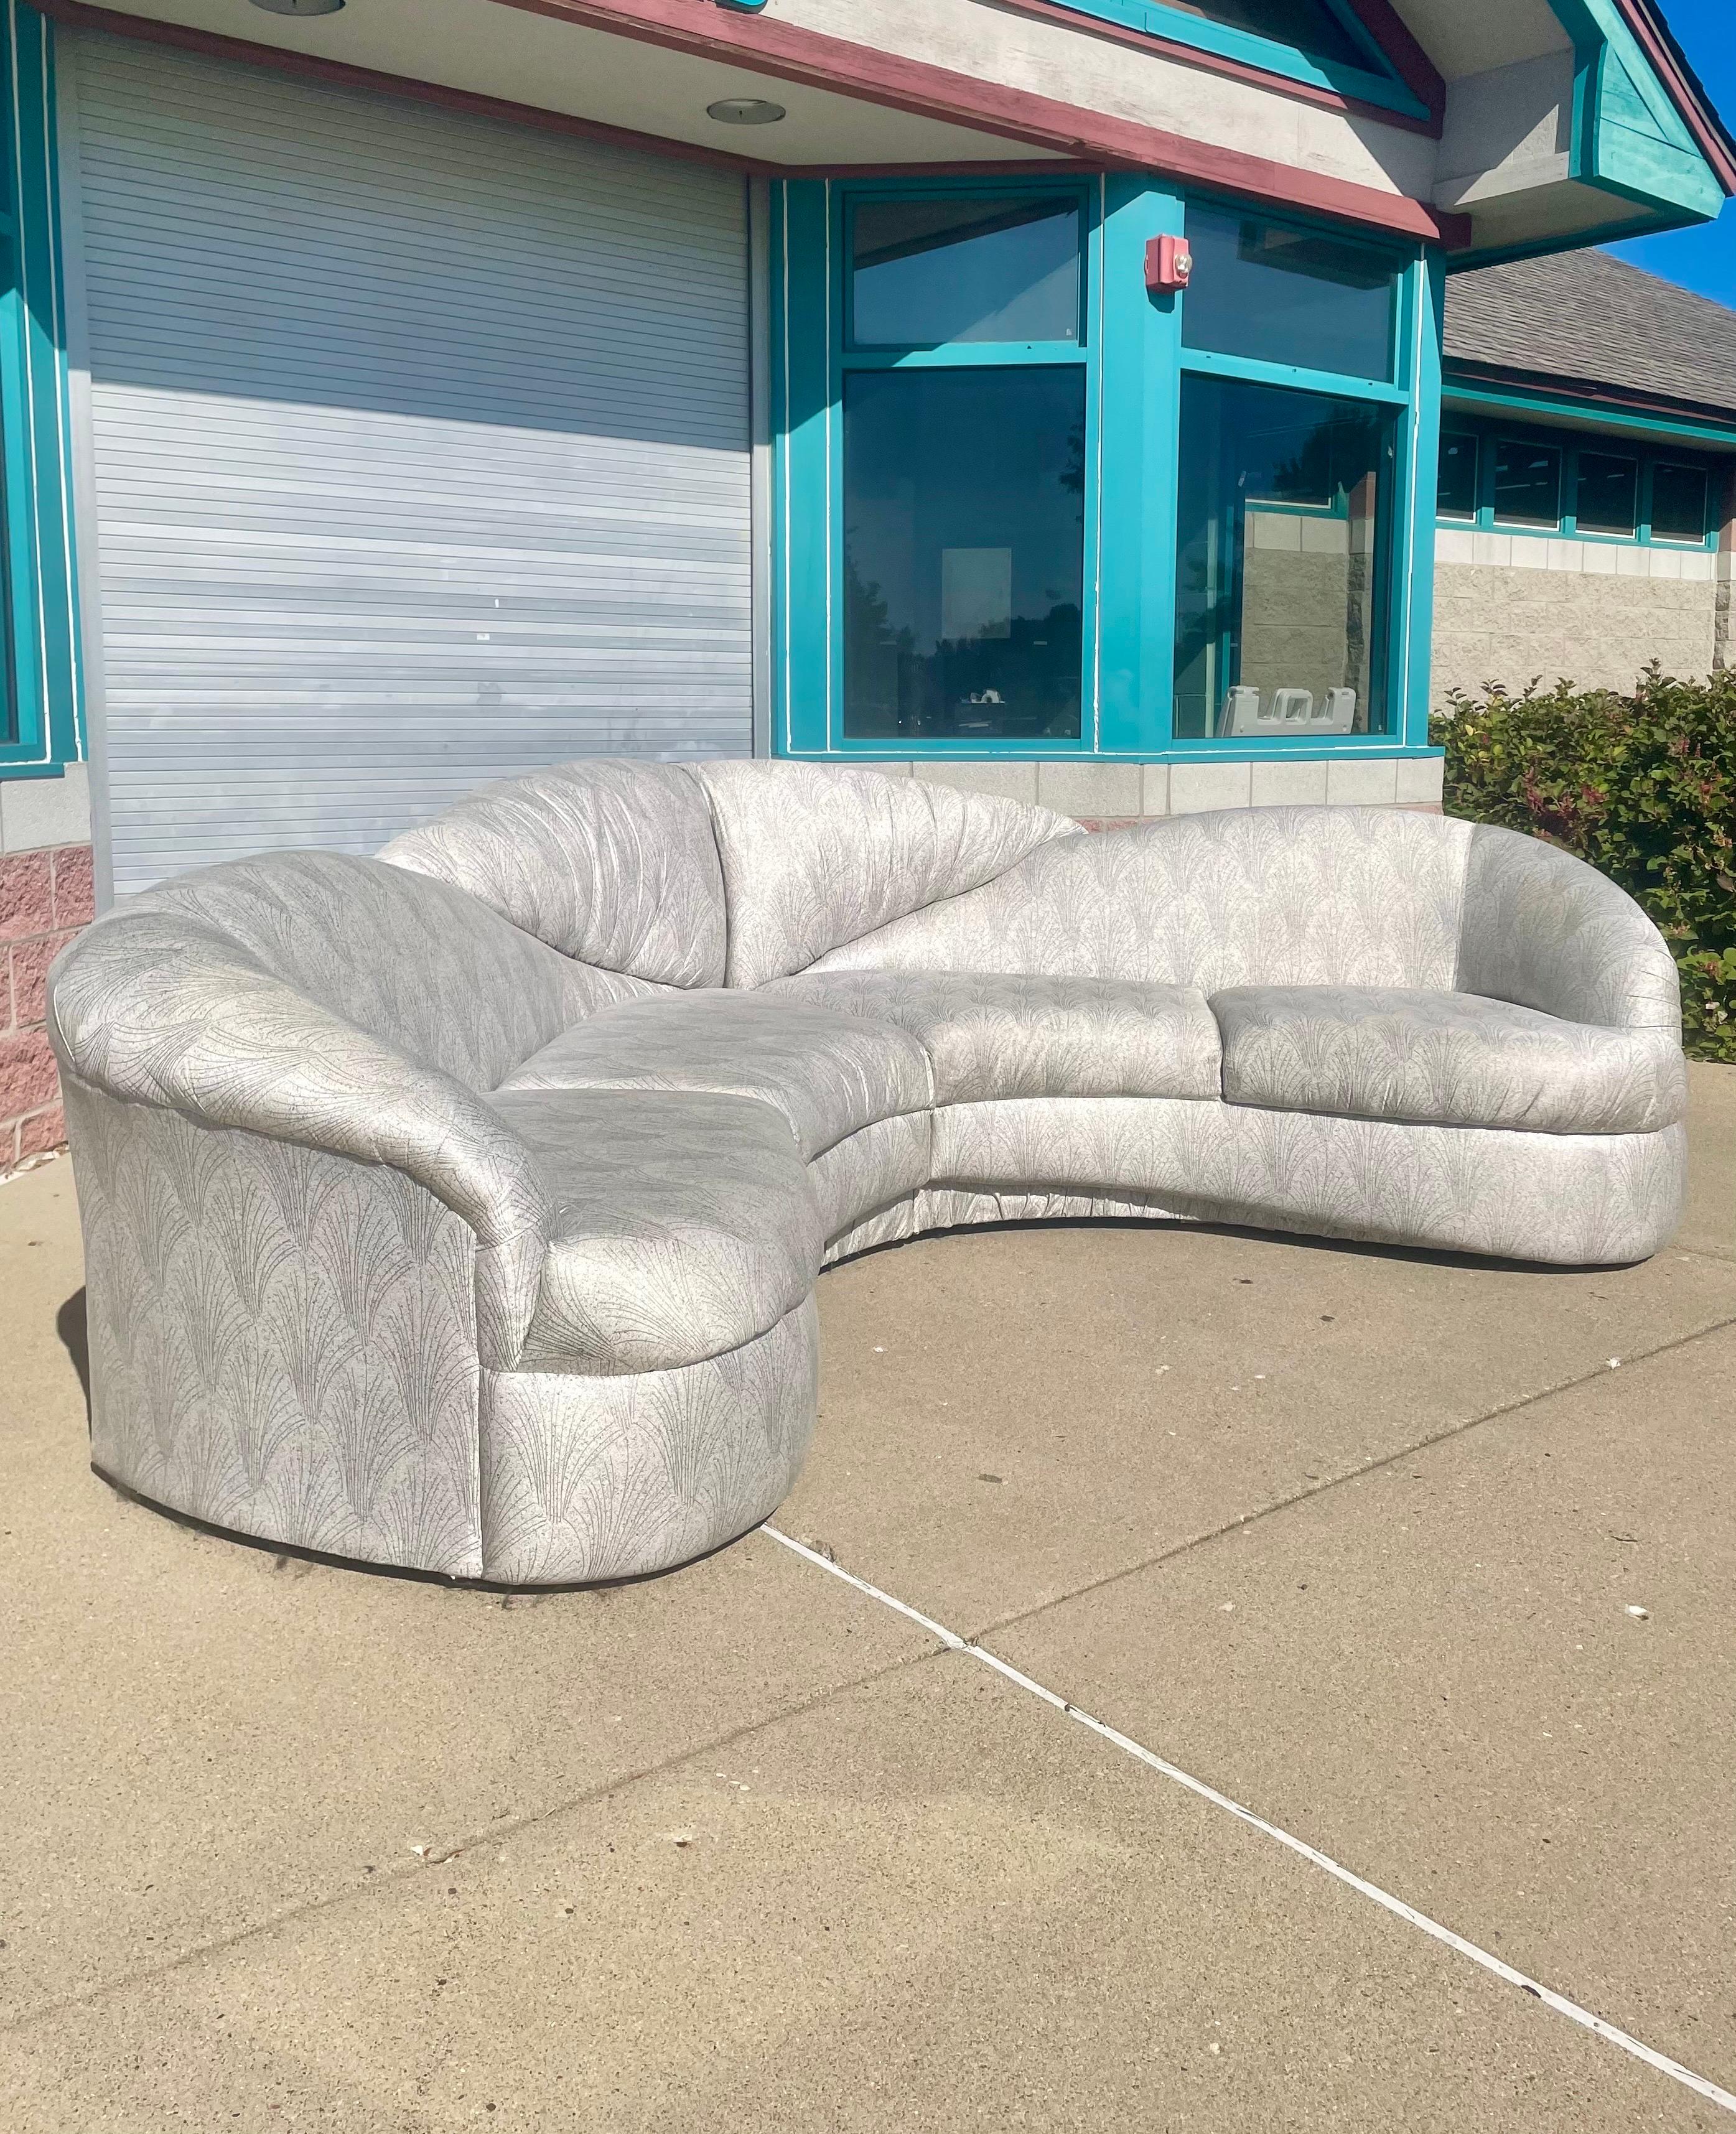 Unique custom gray curved sectional sofa chaise. A vintage beauty sure to make an impactful statement in any interior space. Upholstery fabric features a lovely pattern set in a gray color-way.